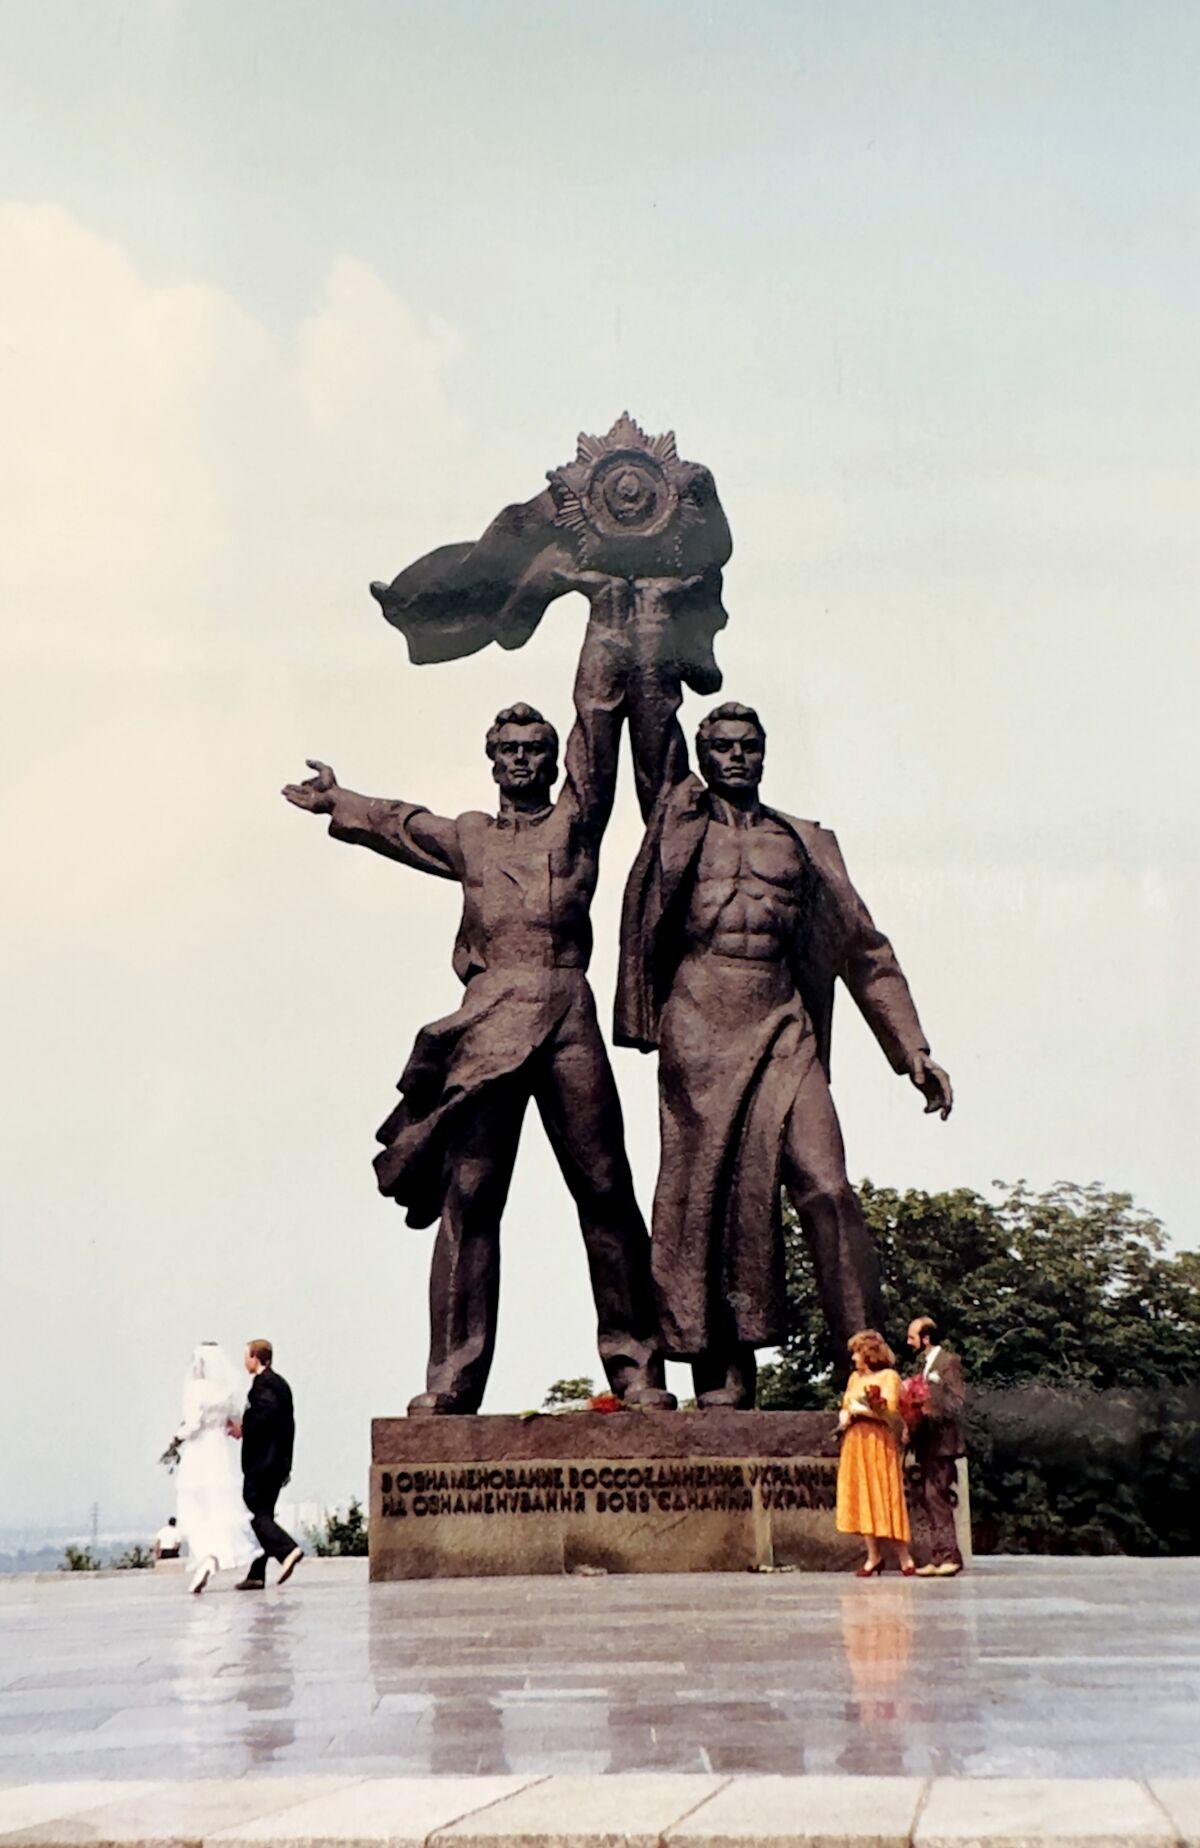 A 1998 photo shows newlyweds laying flowers by a Soviet-era bronze statue of Russian and Ukrainian workers standing in unity.